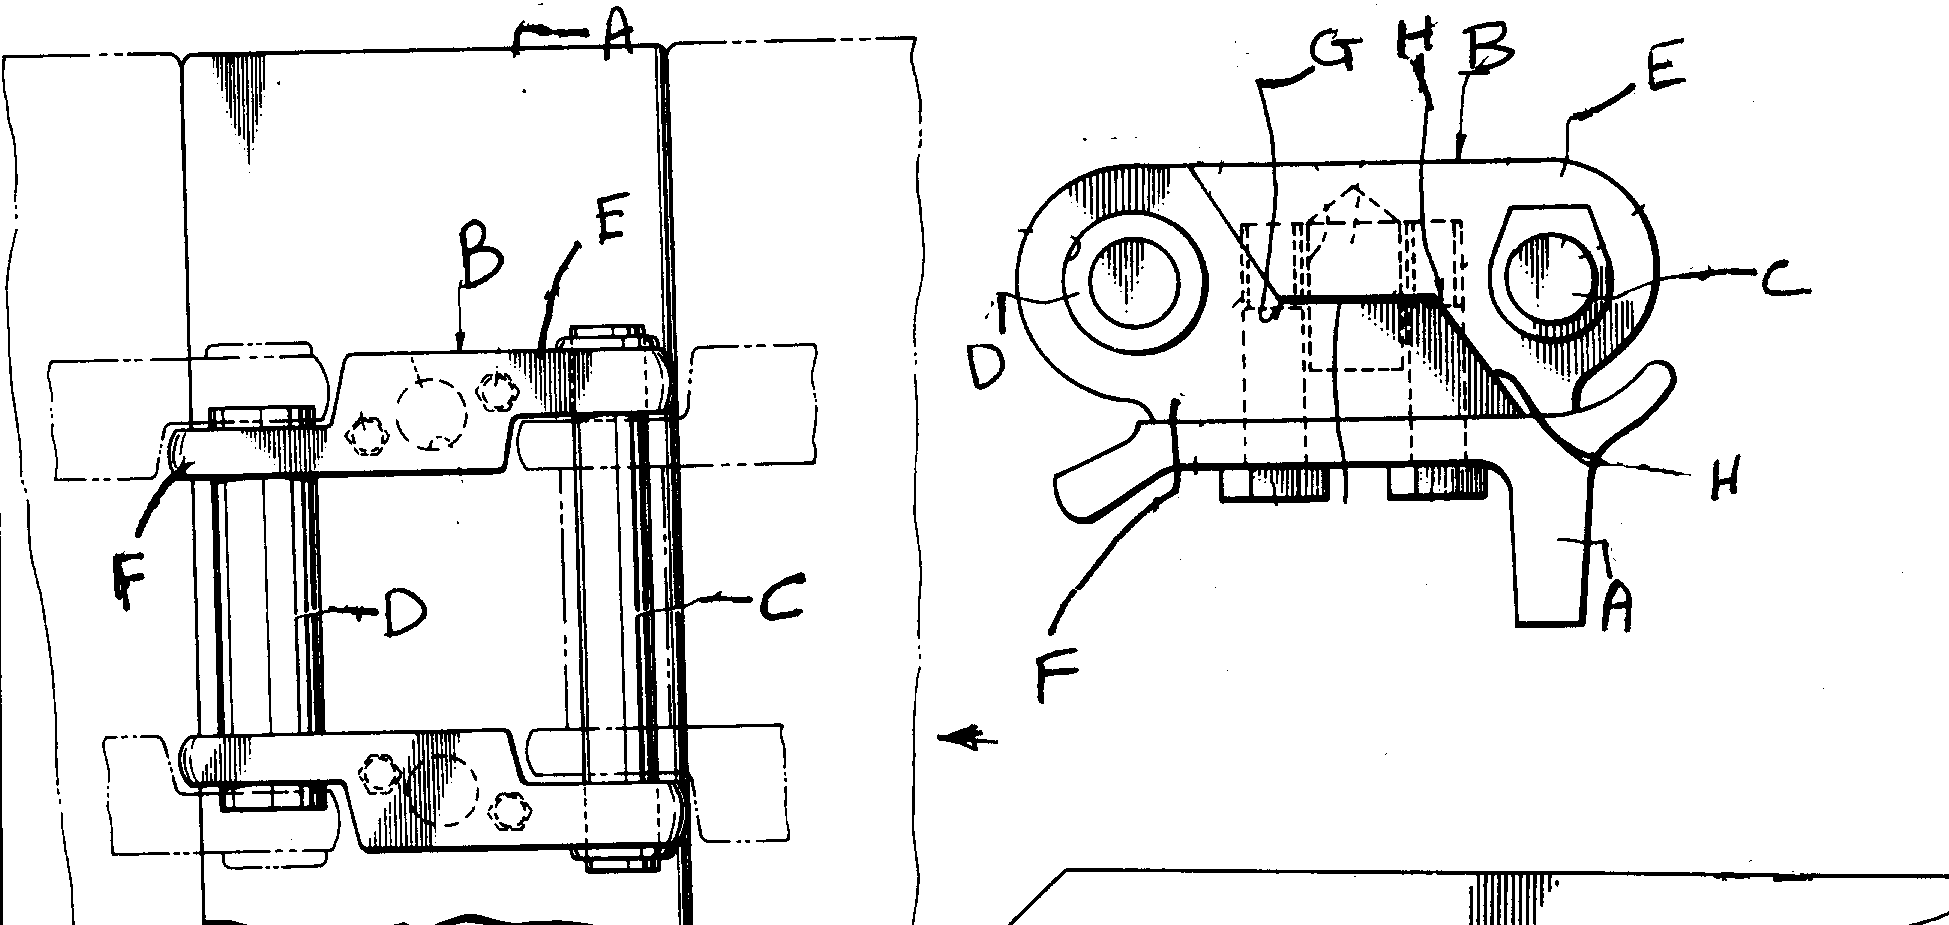 A - Track shoe; B - Master link; C - Track pin; D - Bushing;E, F - Two-piece parts of master link; G, H - Mating surfaces oflink part E and F
